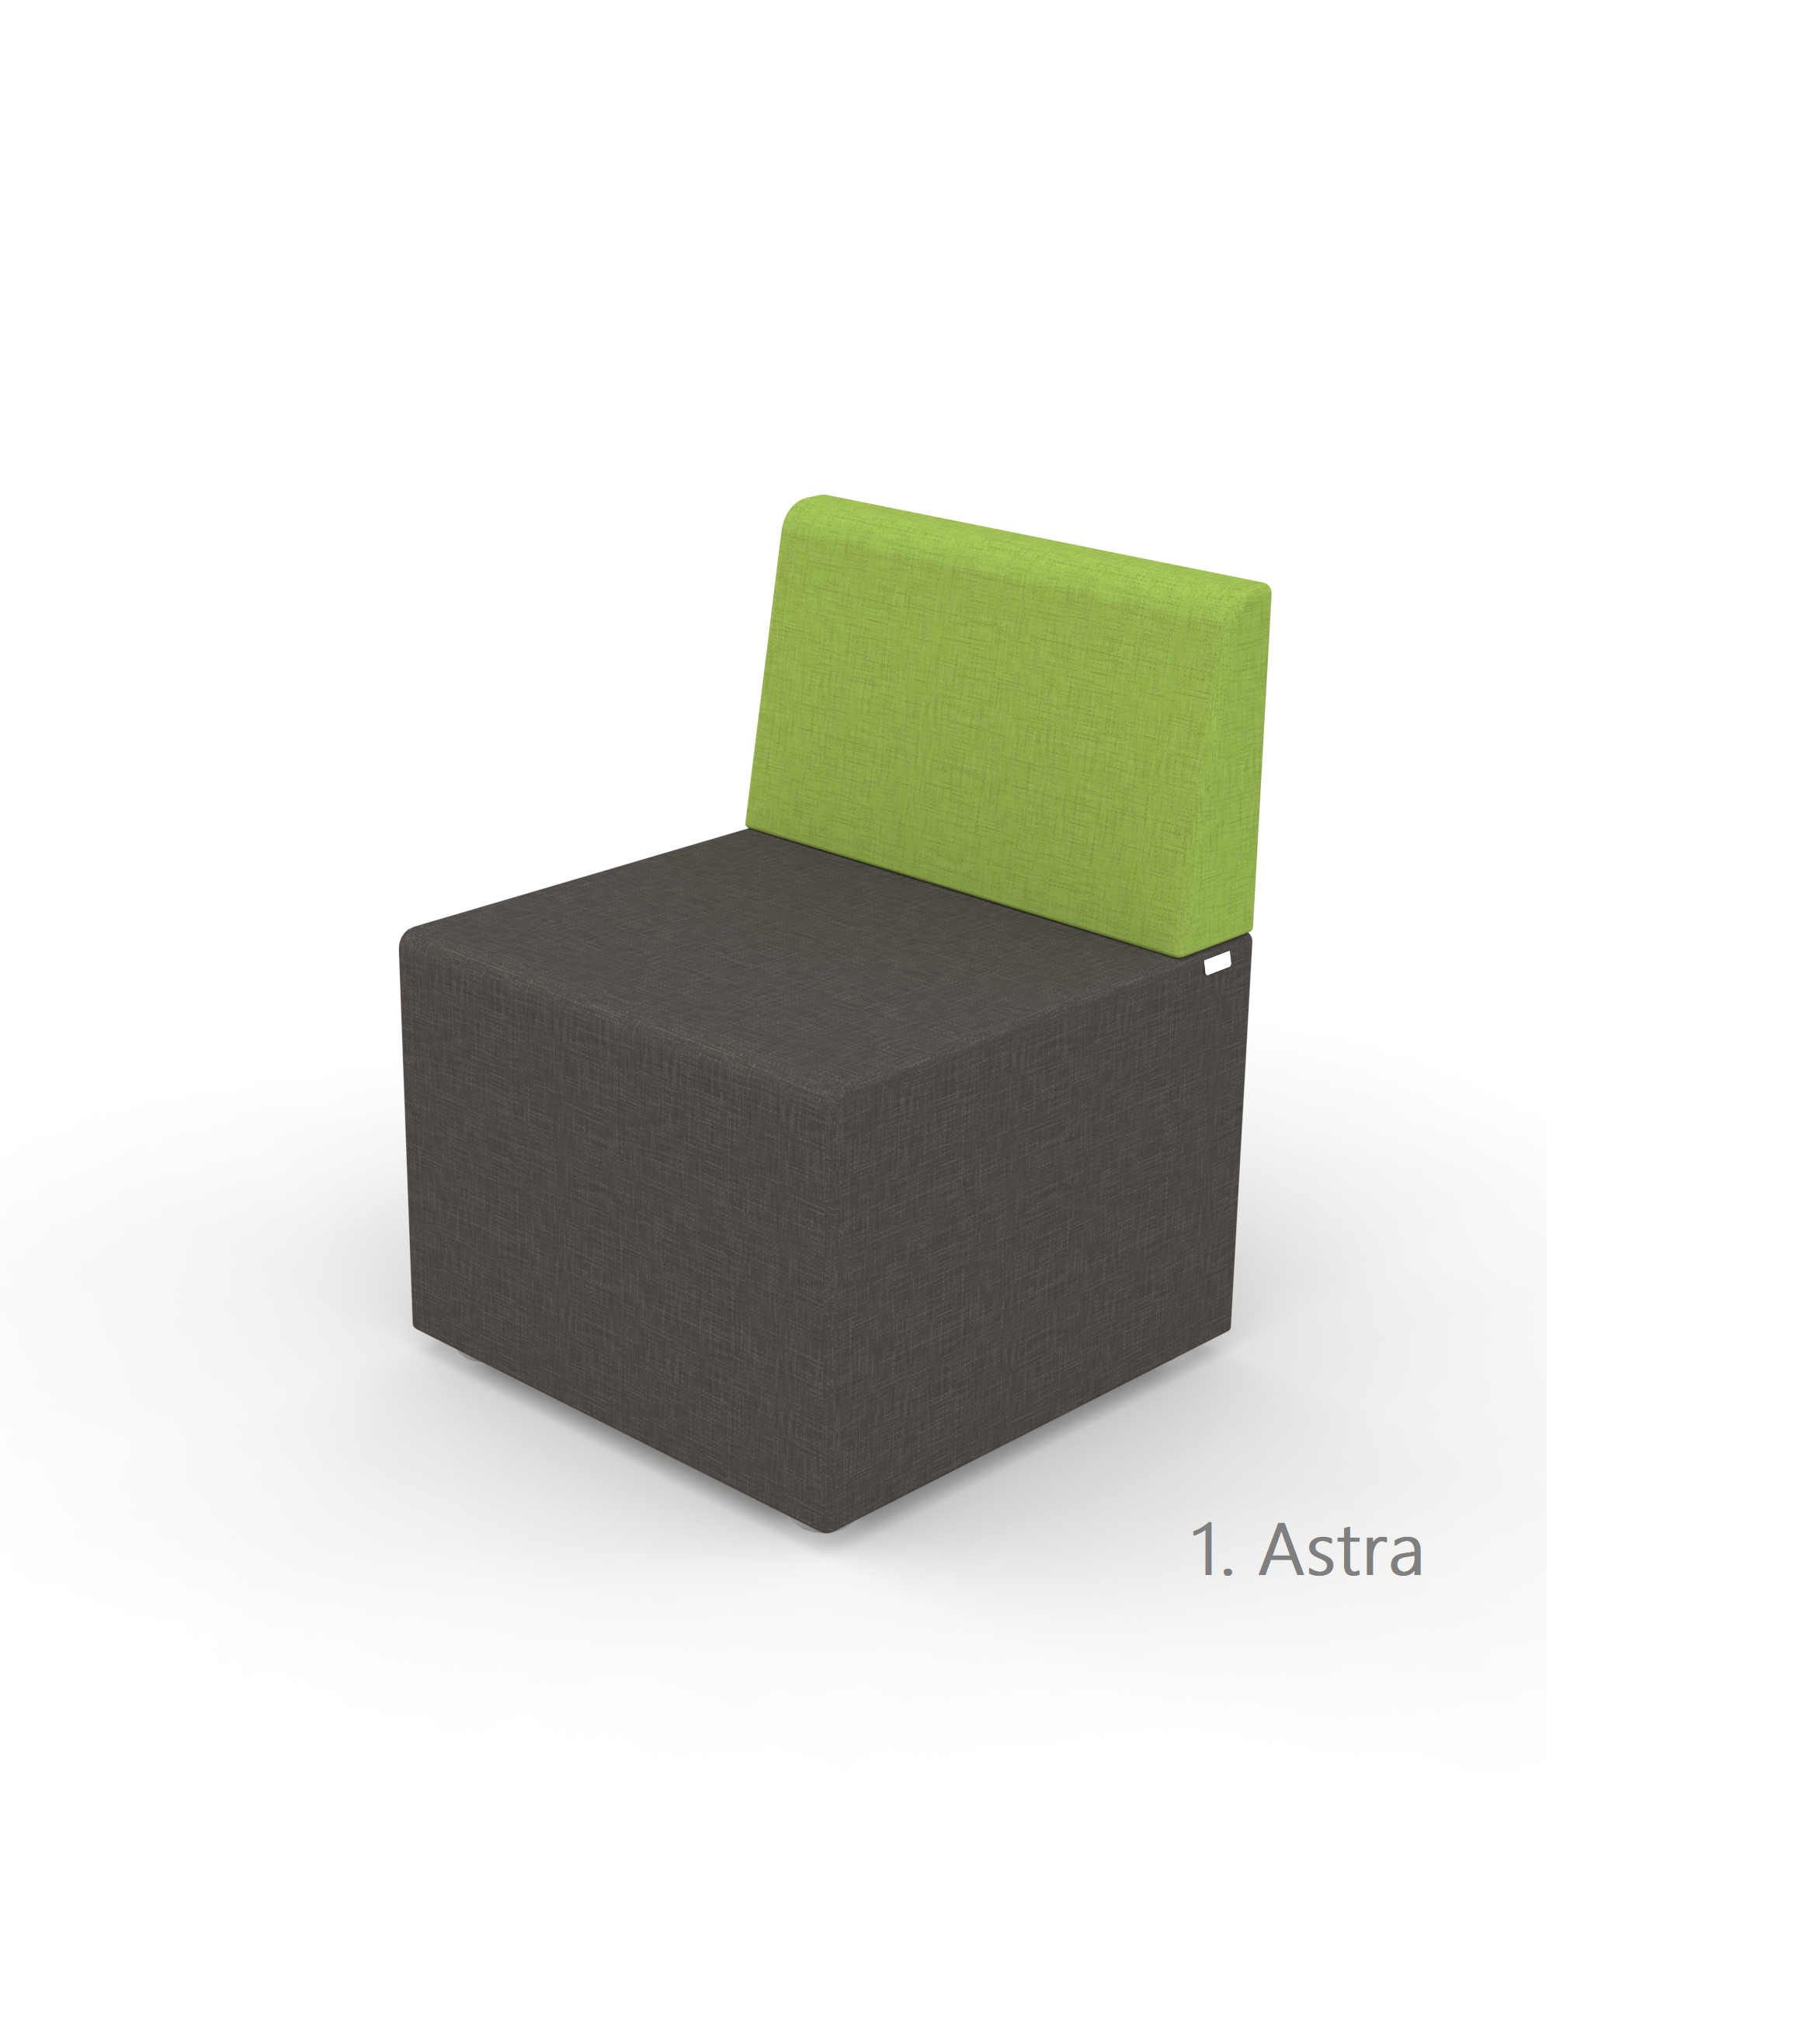 Space Ottoman – Astra